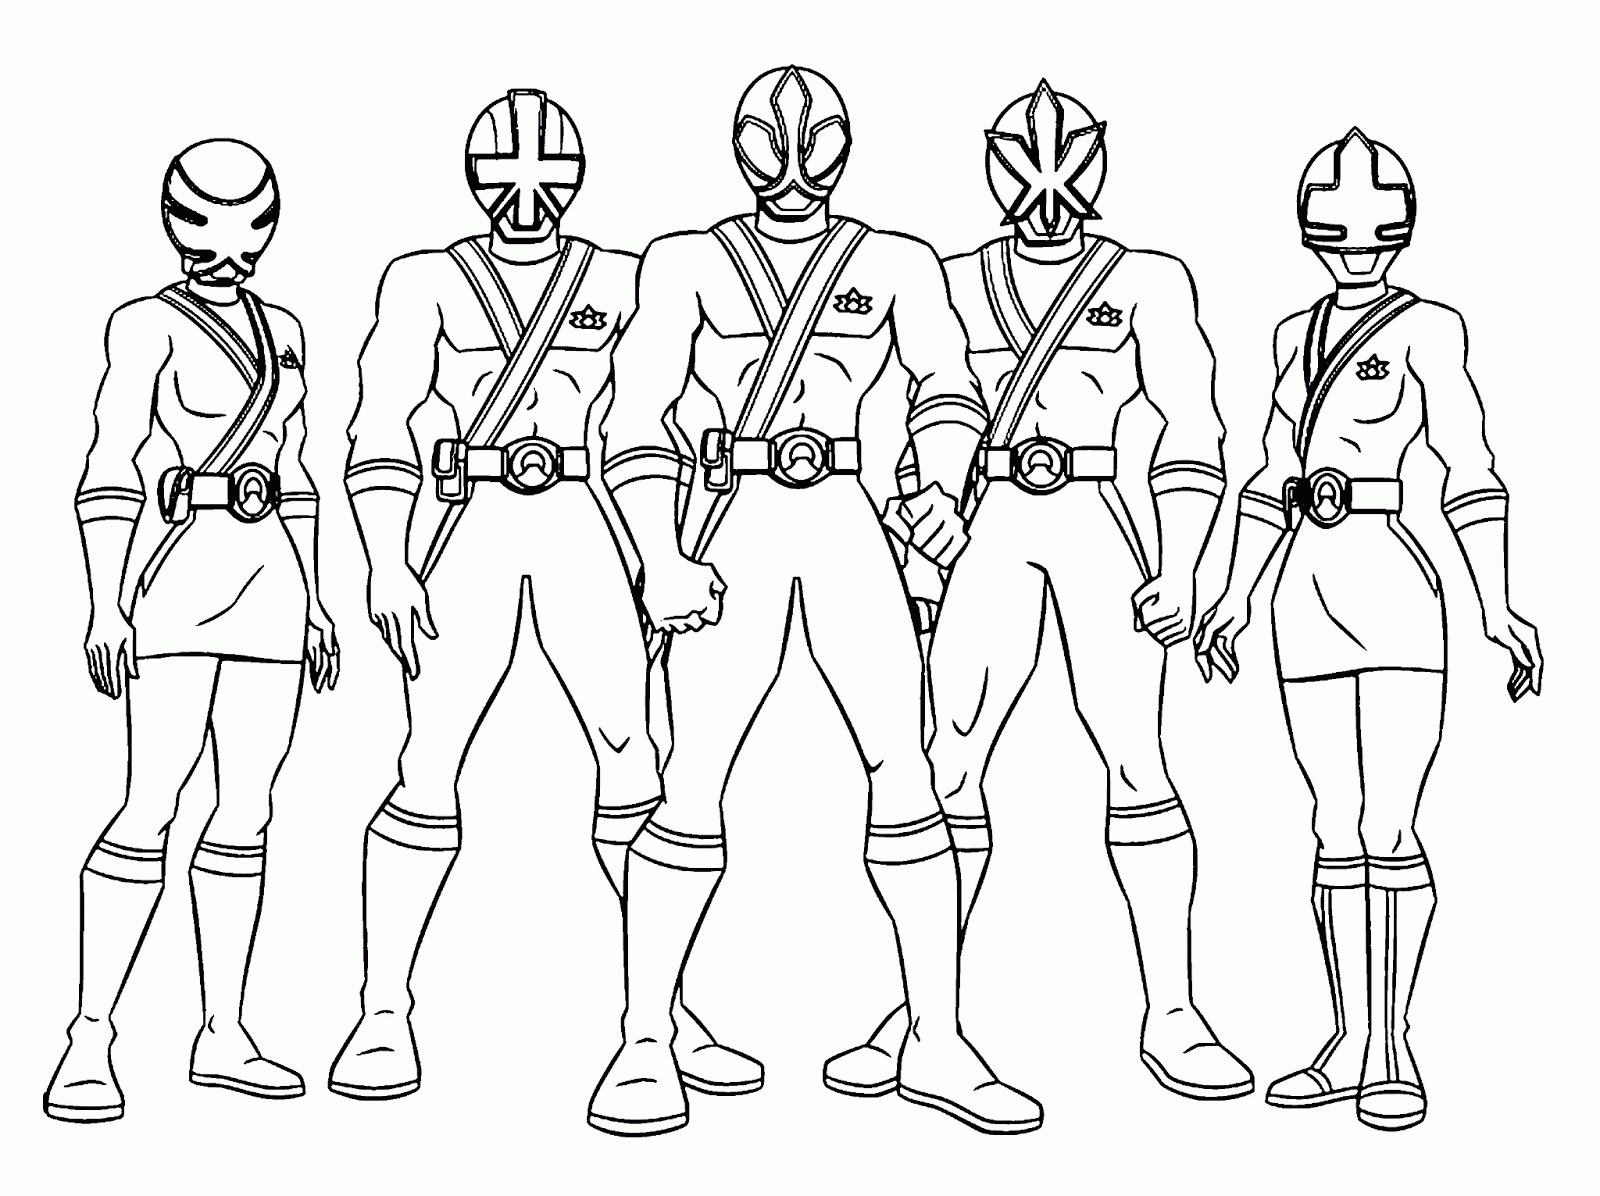 916 Cartoon Power Rangers Jungle Fury Printable Coloring Pages with Printable